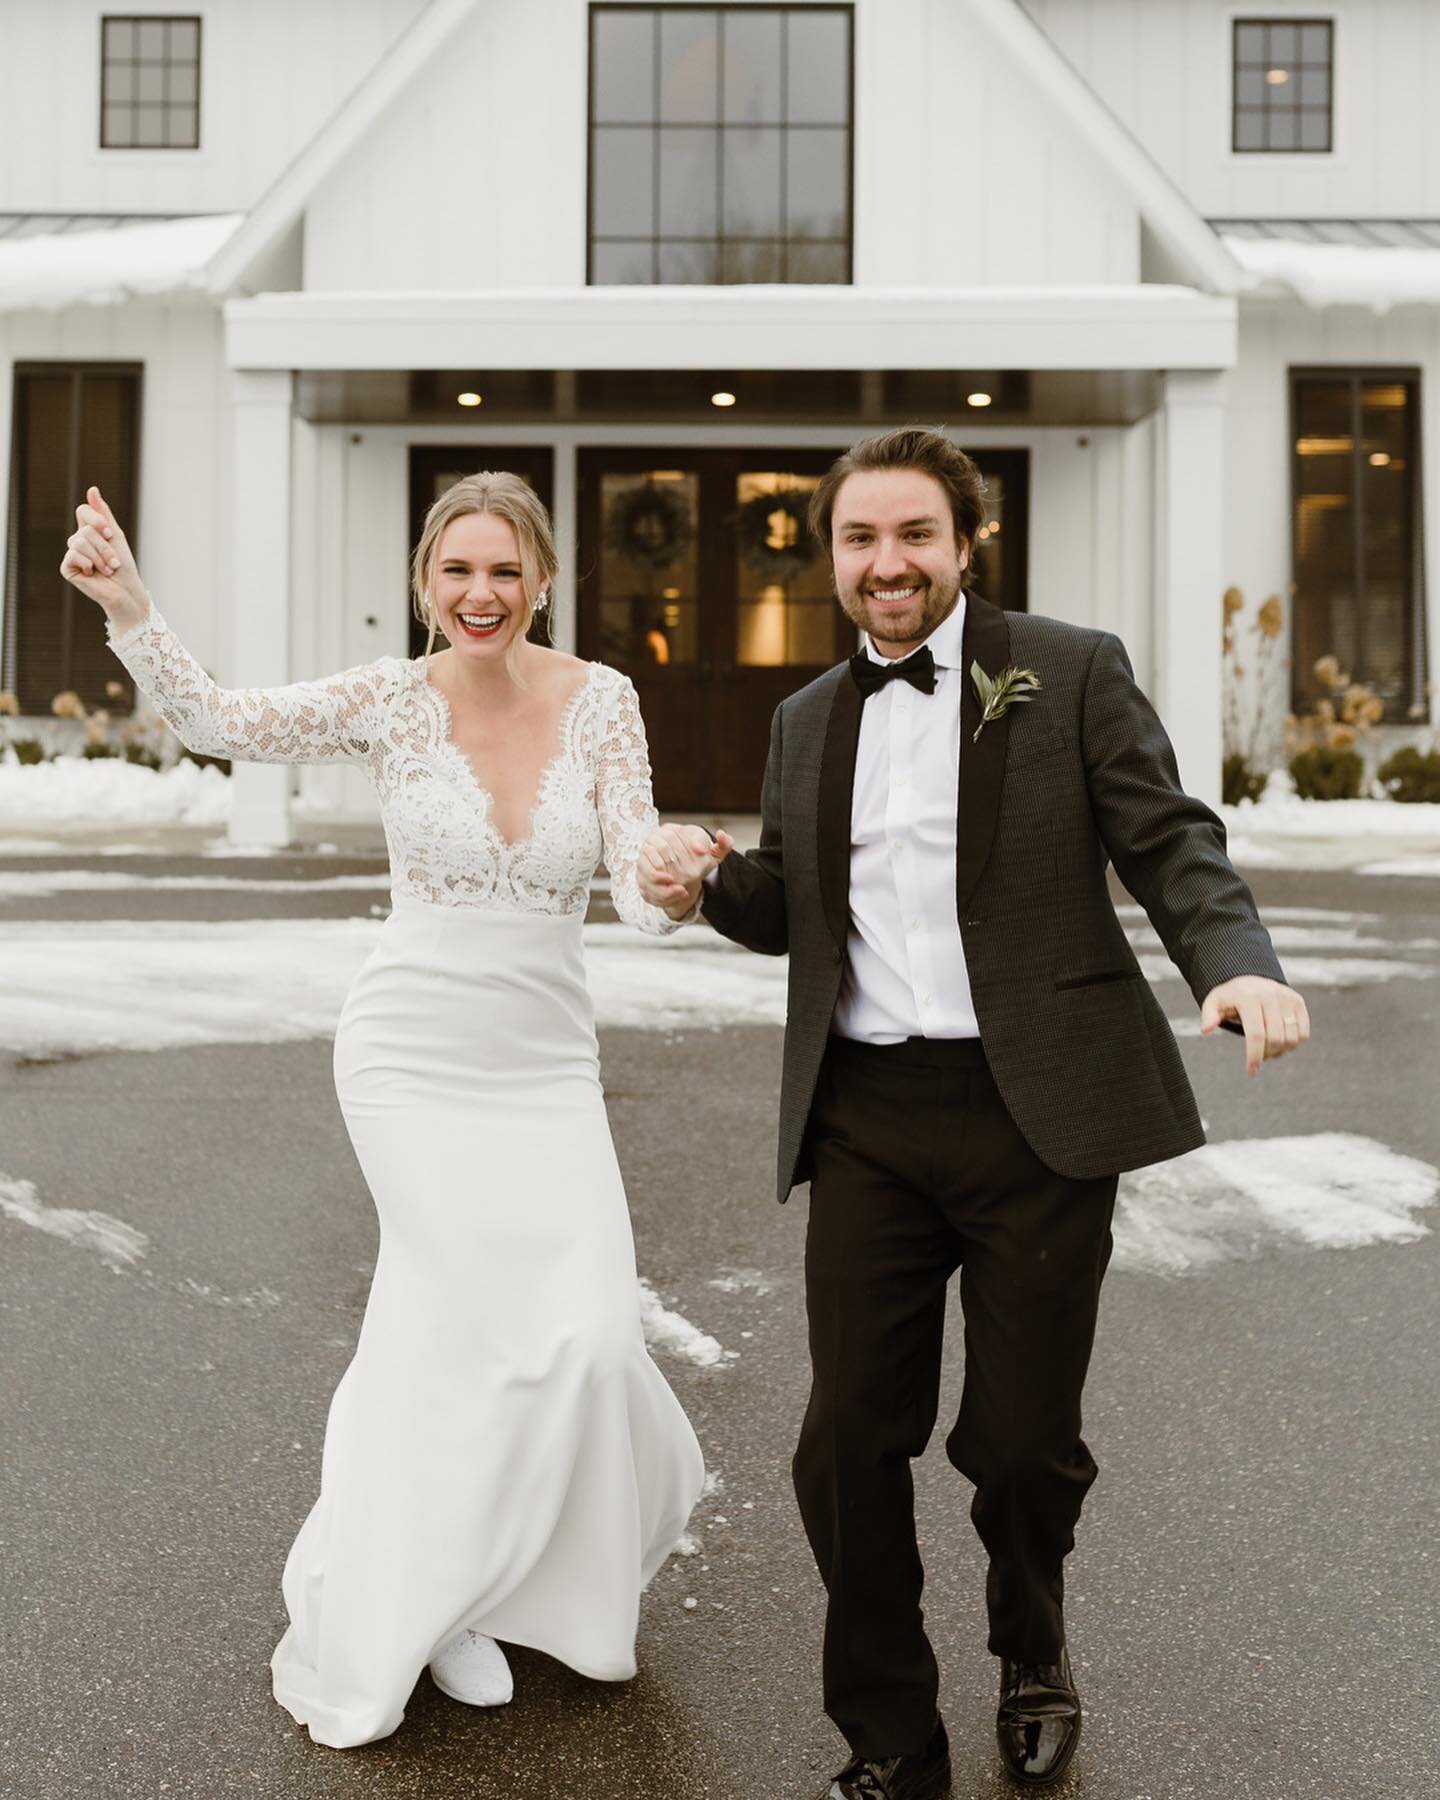 We just hit &quot;send&quot; on Ashley + Joel's wedding gallery and feel fully inspired to bring all of this joyful energy into our weekend plans (and by plans we mean staying cozy at home 😎).